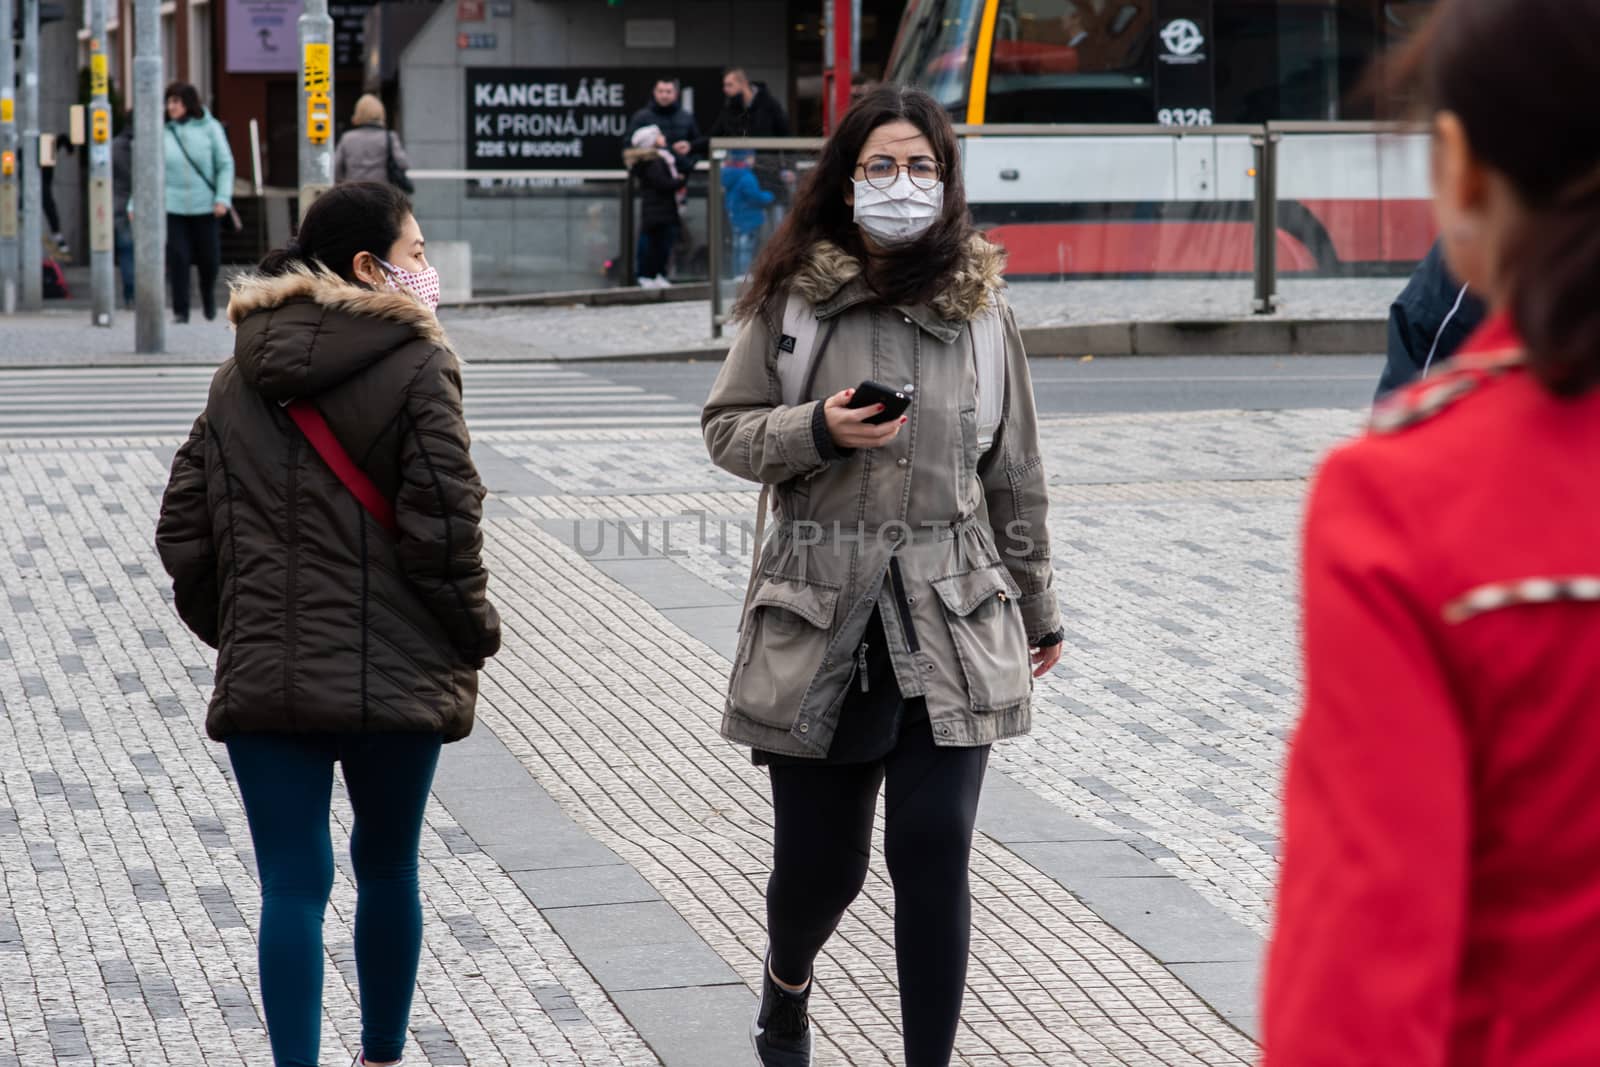 11/16/2020. Prague. Czech Republic. A woman wearing a mask is crossing the railways at Hradcanska tram stop during quarantine. by gonzalobell